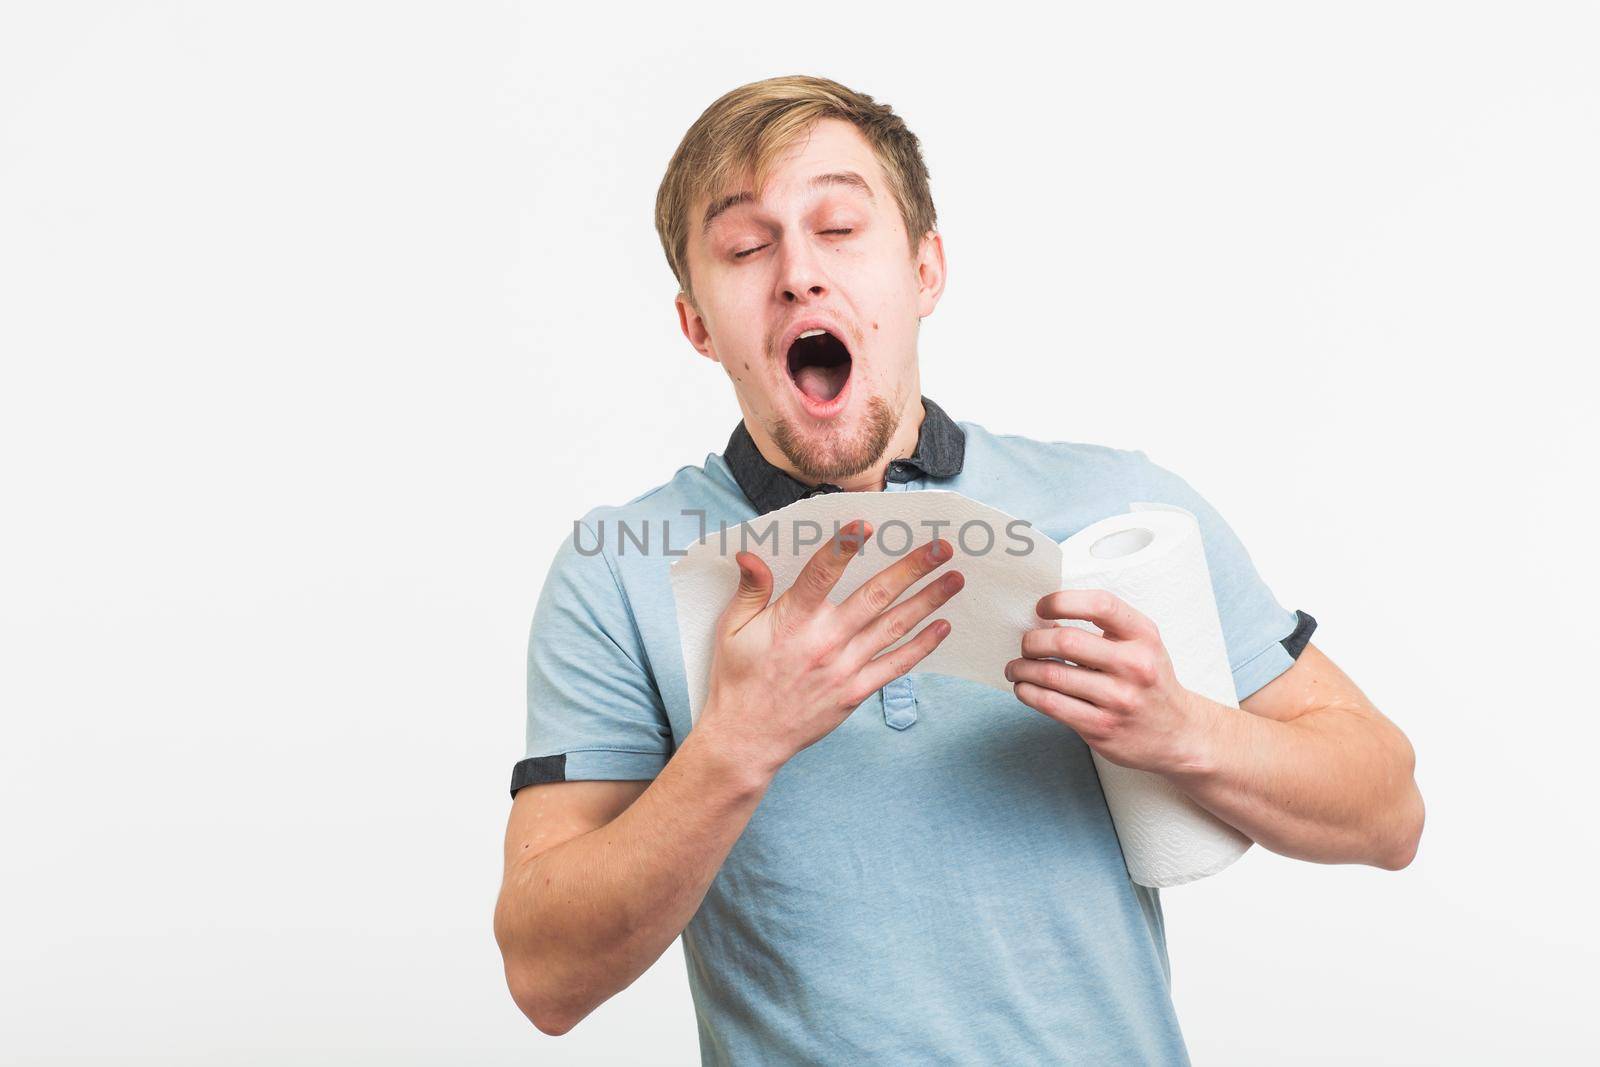 Man Sneezing Studio Portrait Concept. Young man with handkerchief. Sick guy isolated has runny nose